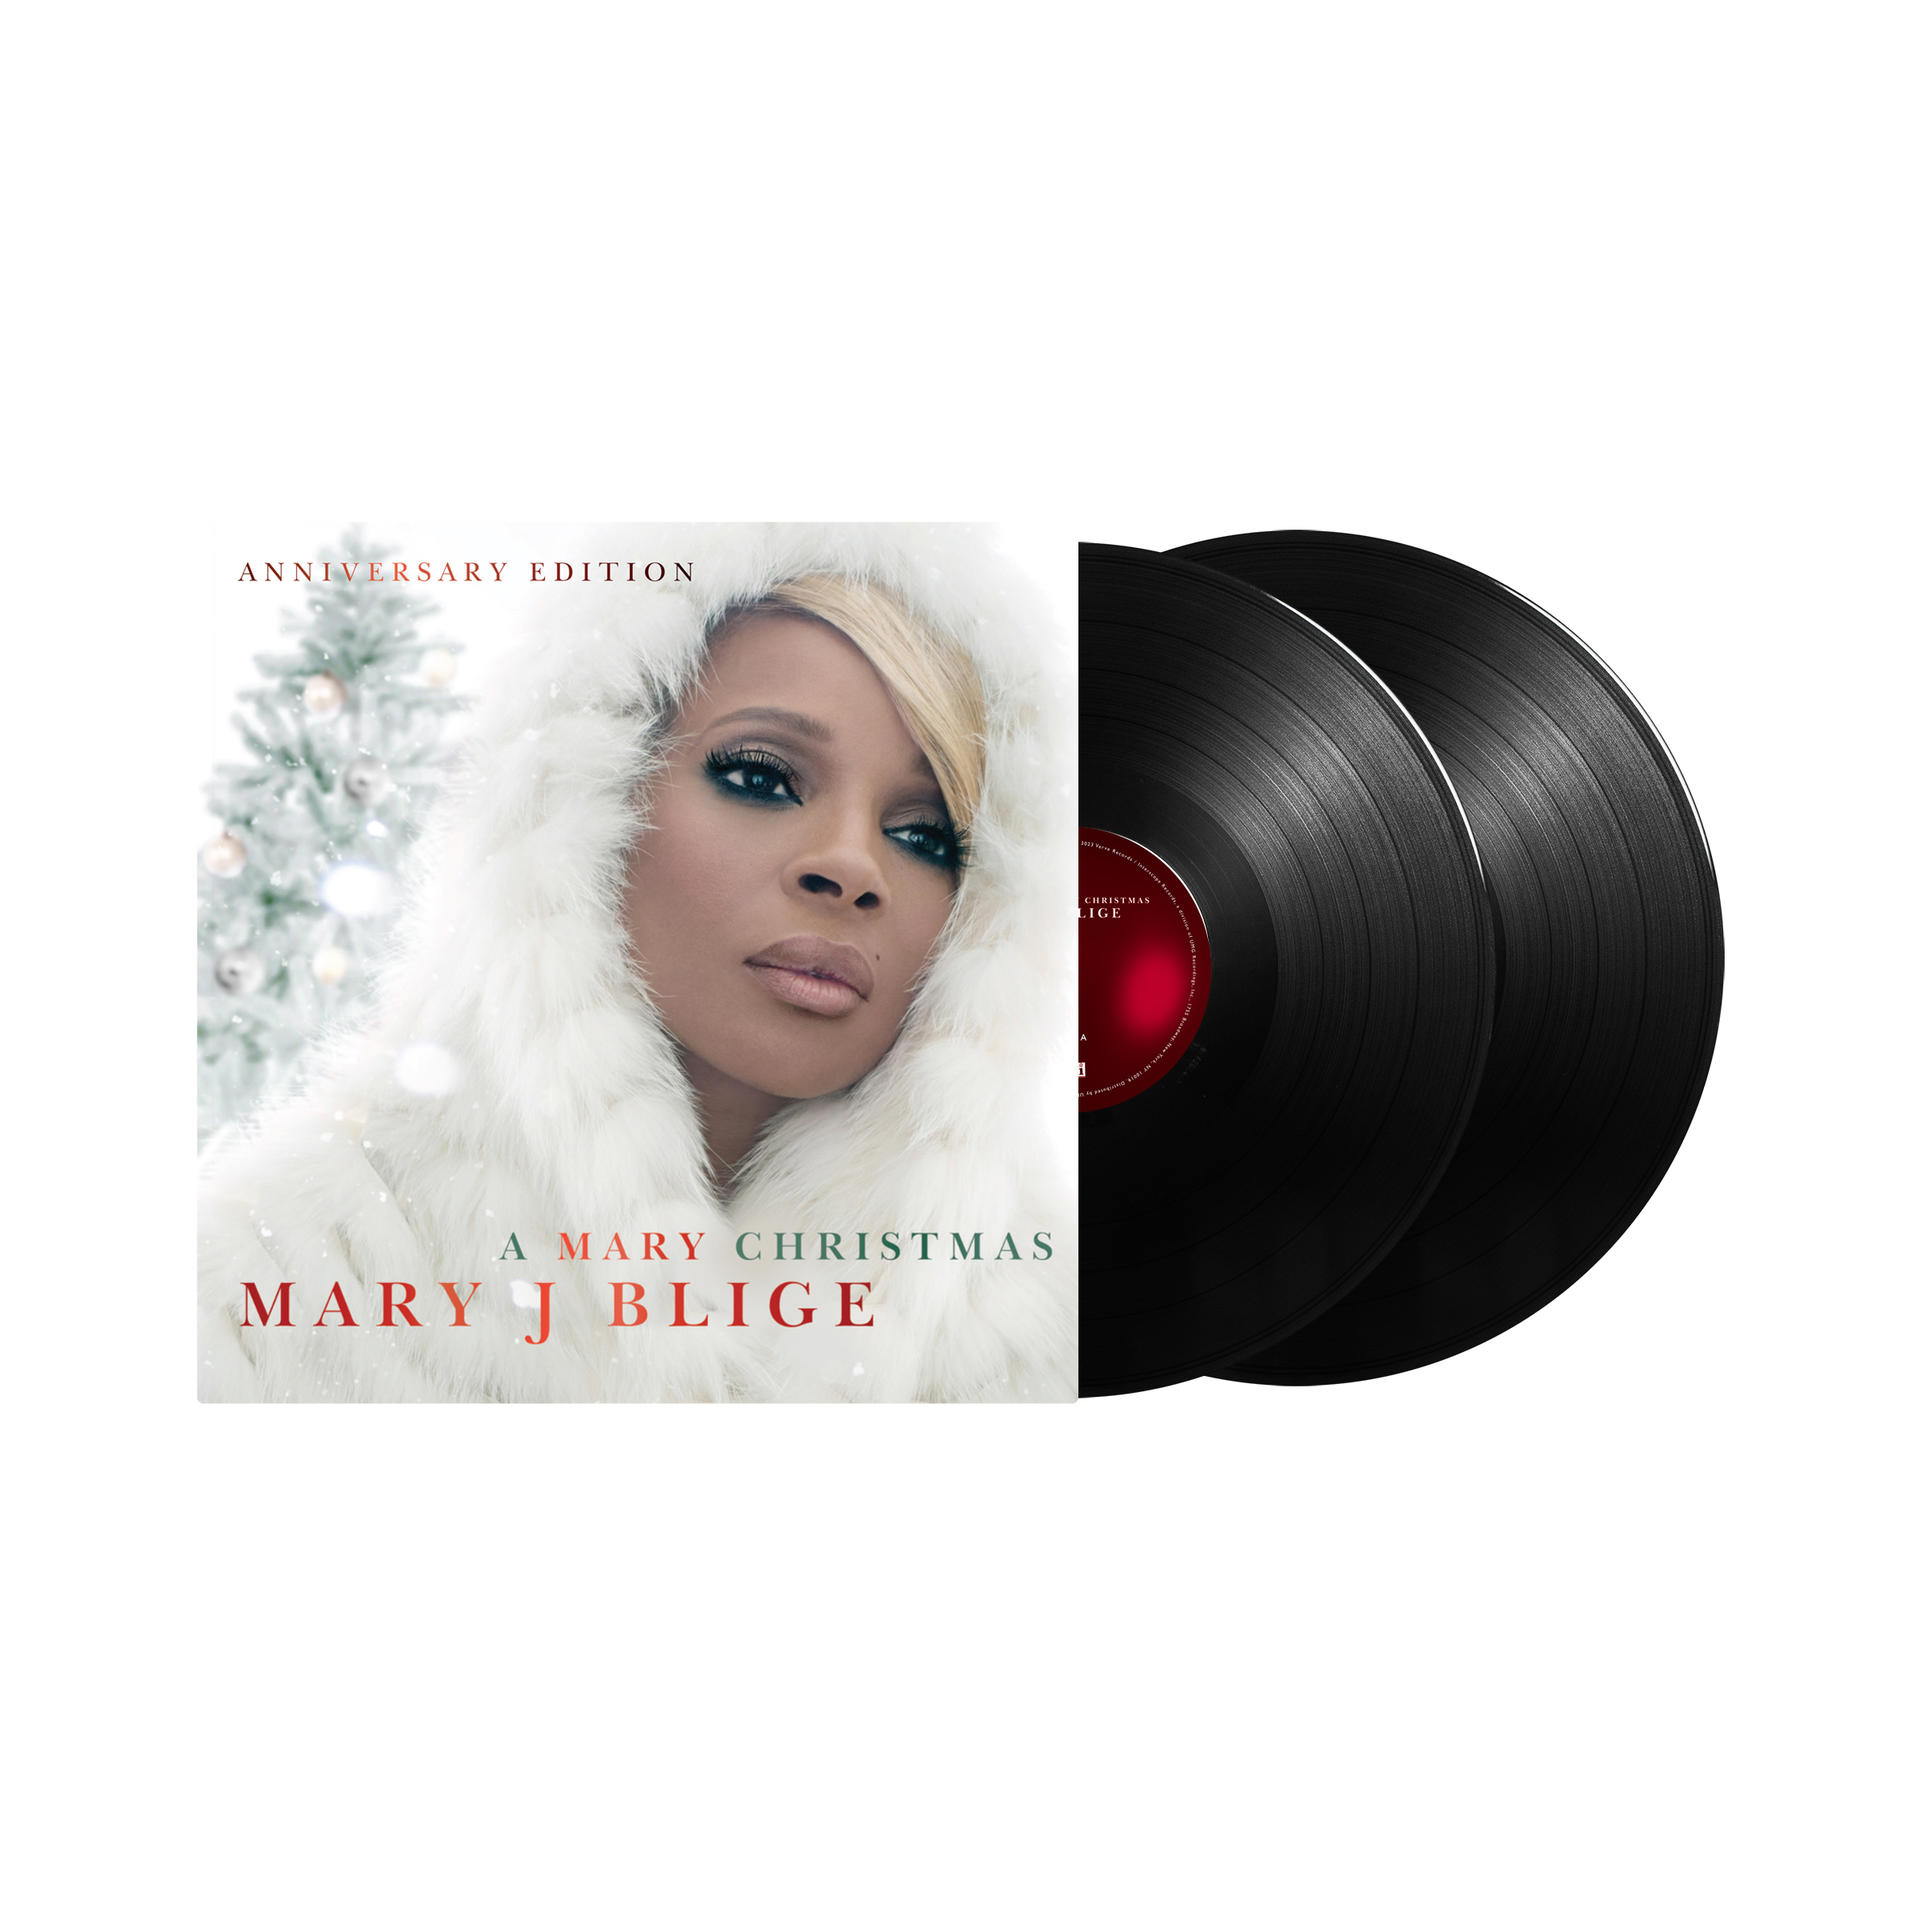 Mary J. (CD) Edition) (Anniversary Christmas A Blige - Mary 